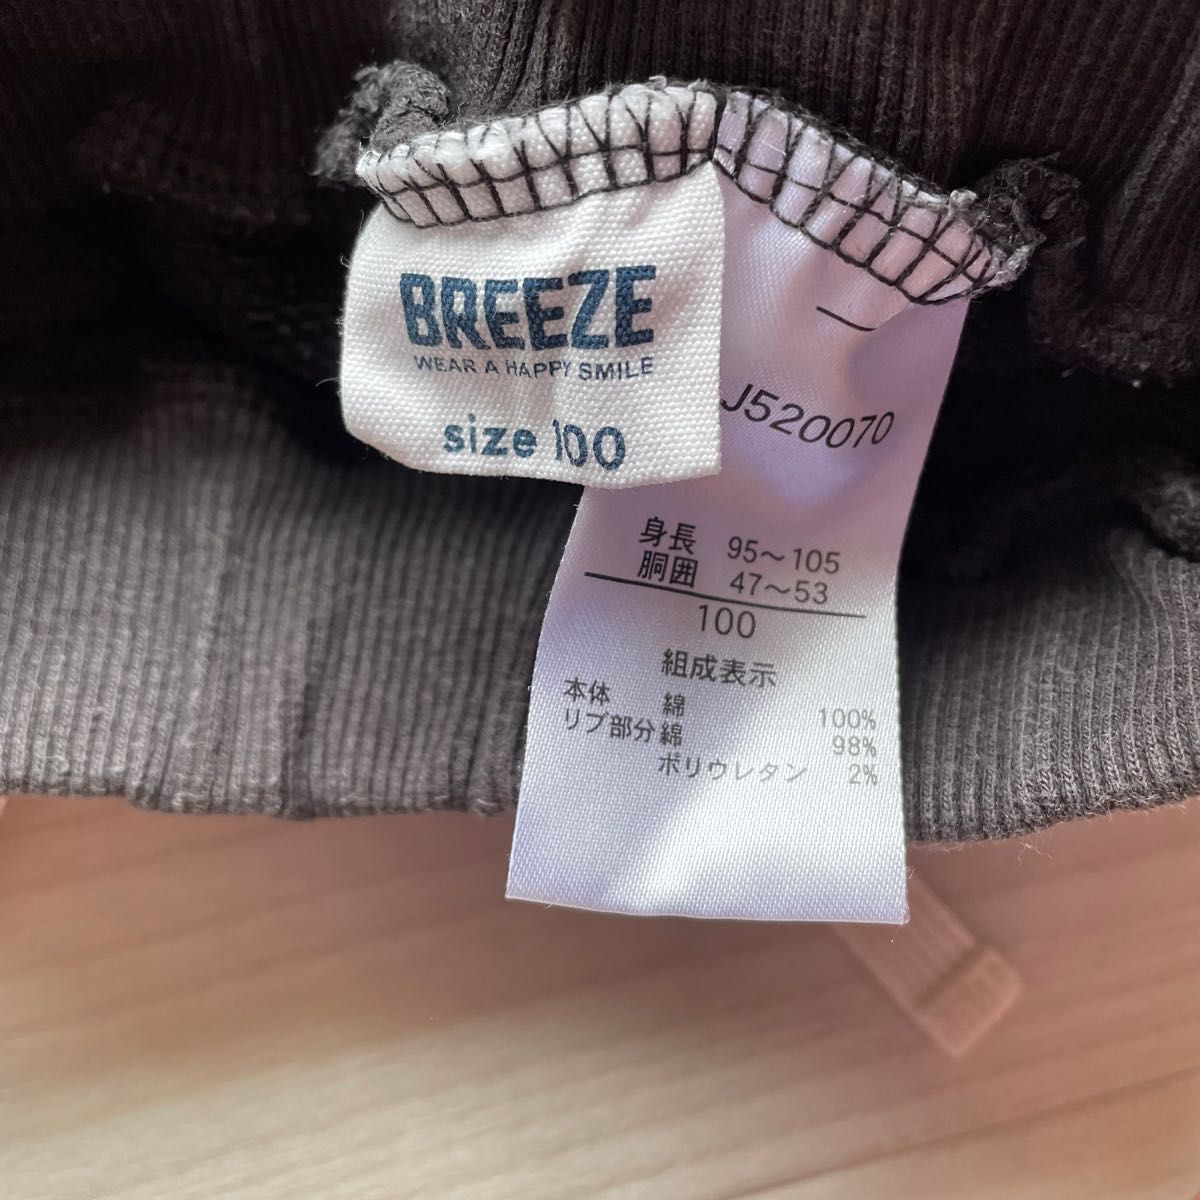 BREEZE120 ダークグレー トップス - トップス(その他)